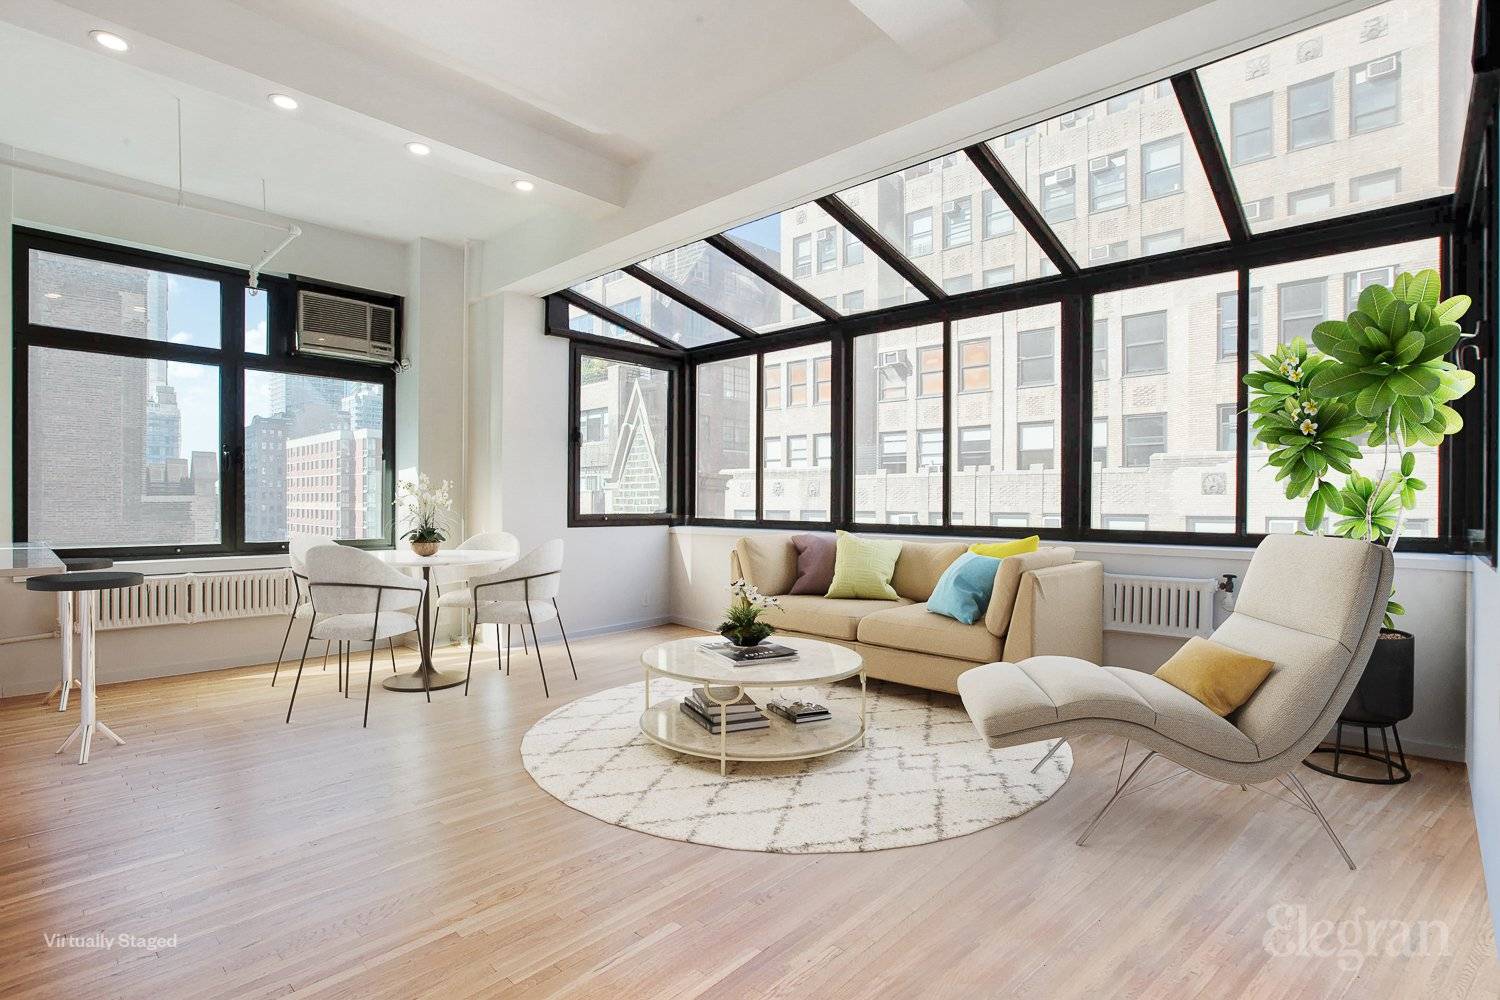 LOVE THE LIGHT Entertaining, lounging, and dining couldn't be better than in this extraordinary loft with 11ft ceilings and a living room that features a solarium bathed in sunlight.